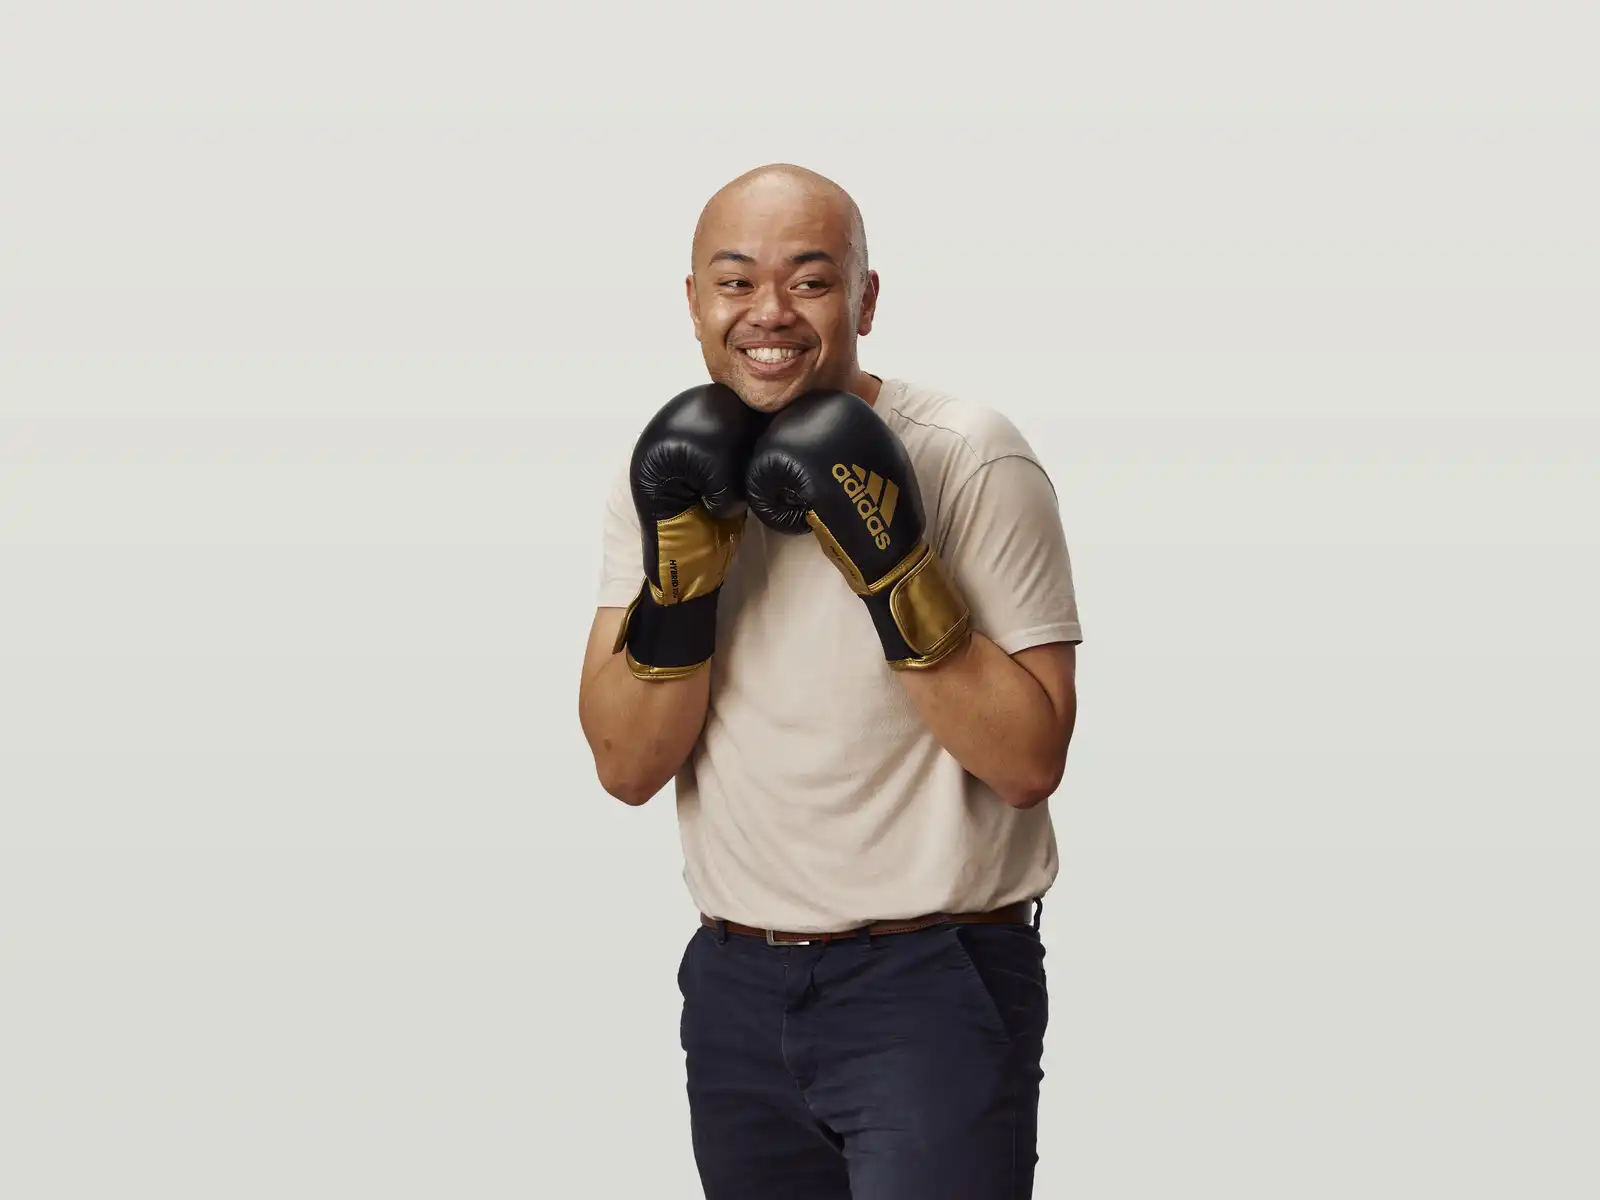 Wilson in a white shirt wearing boxing gloves